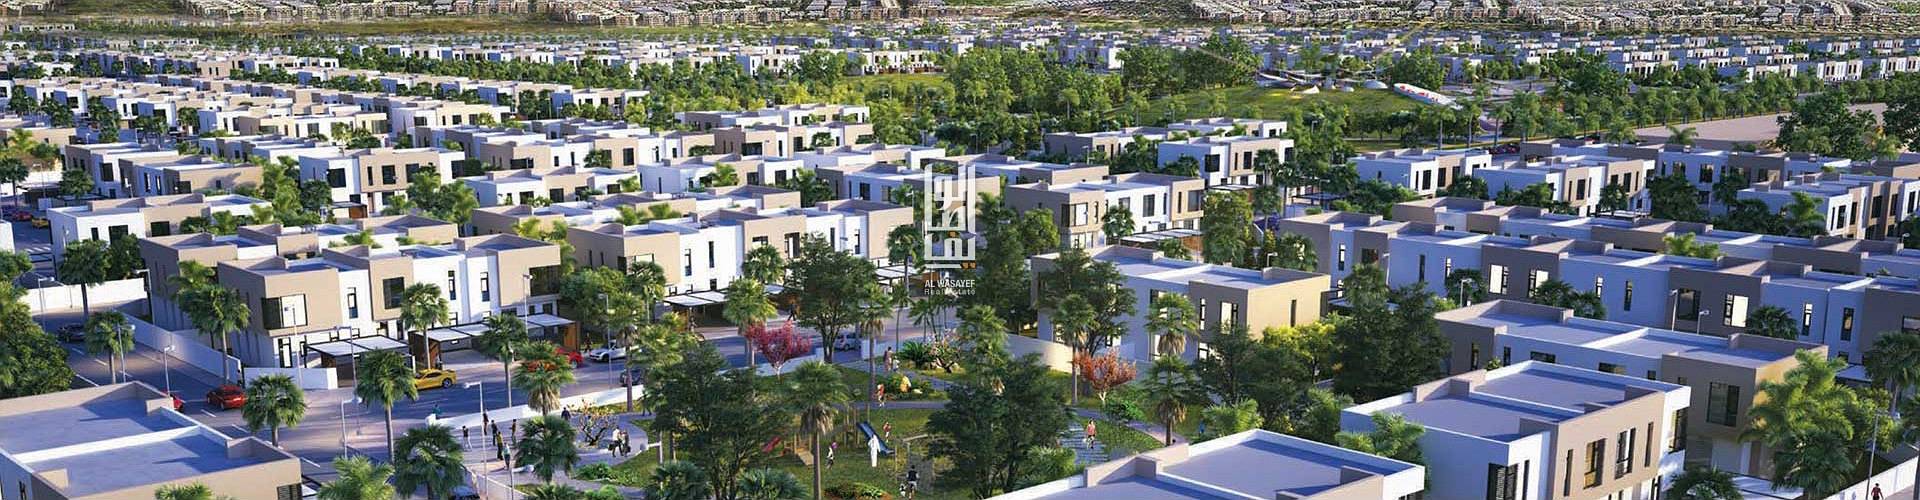 7 2 & 3 bedroom Bareem Townhouses from AED 899